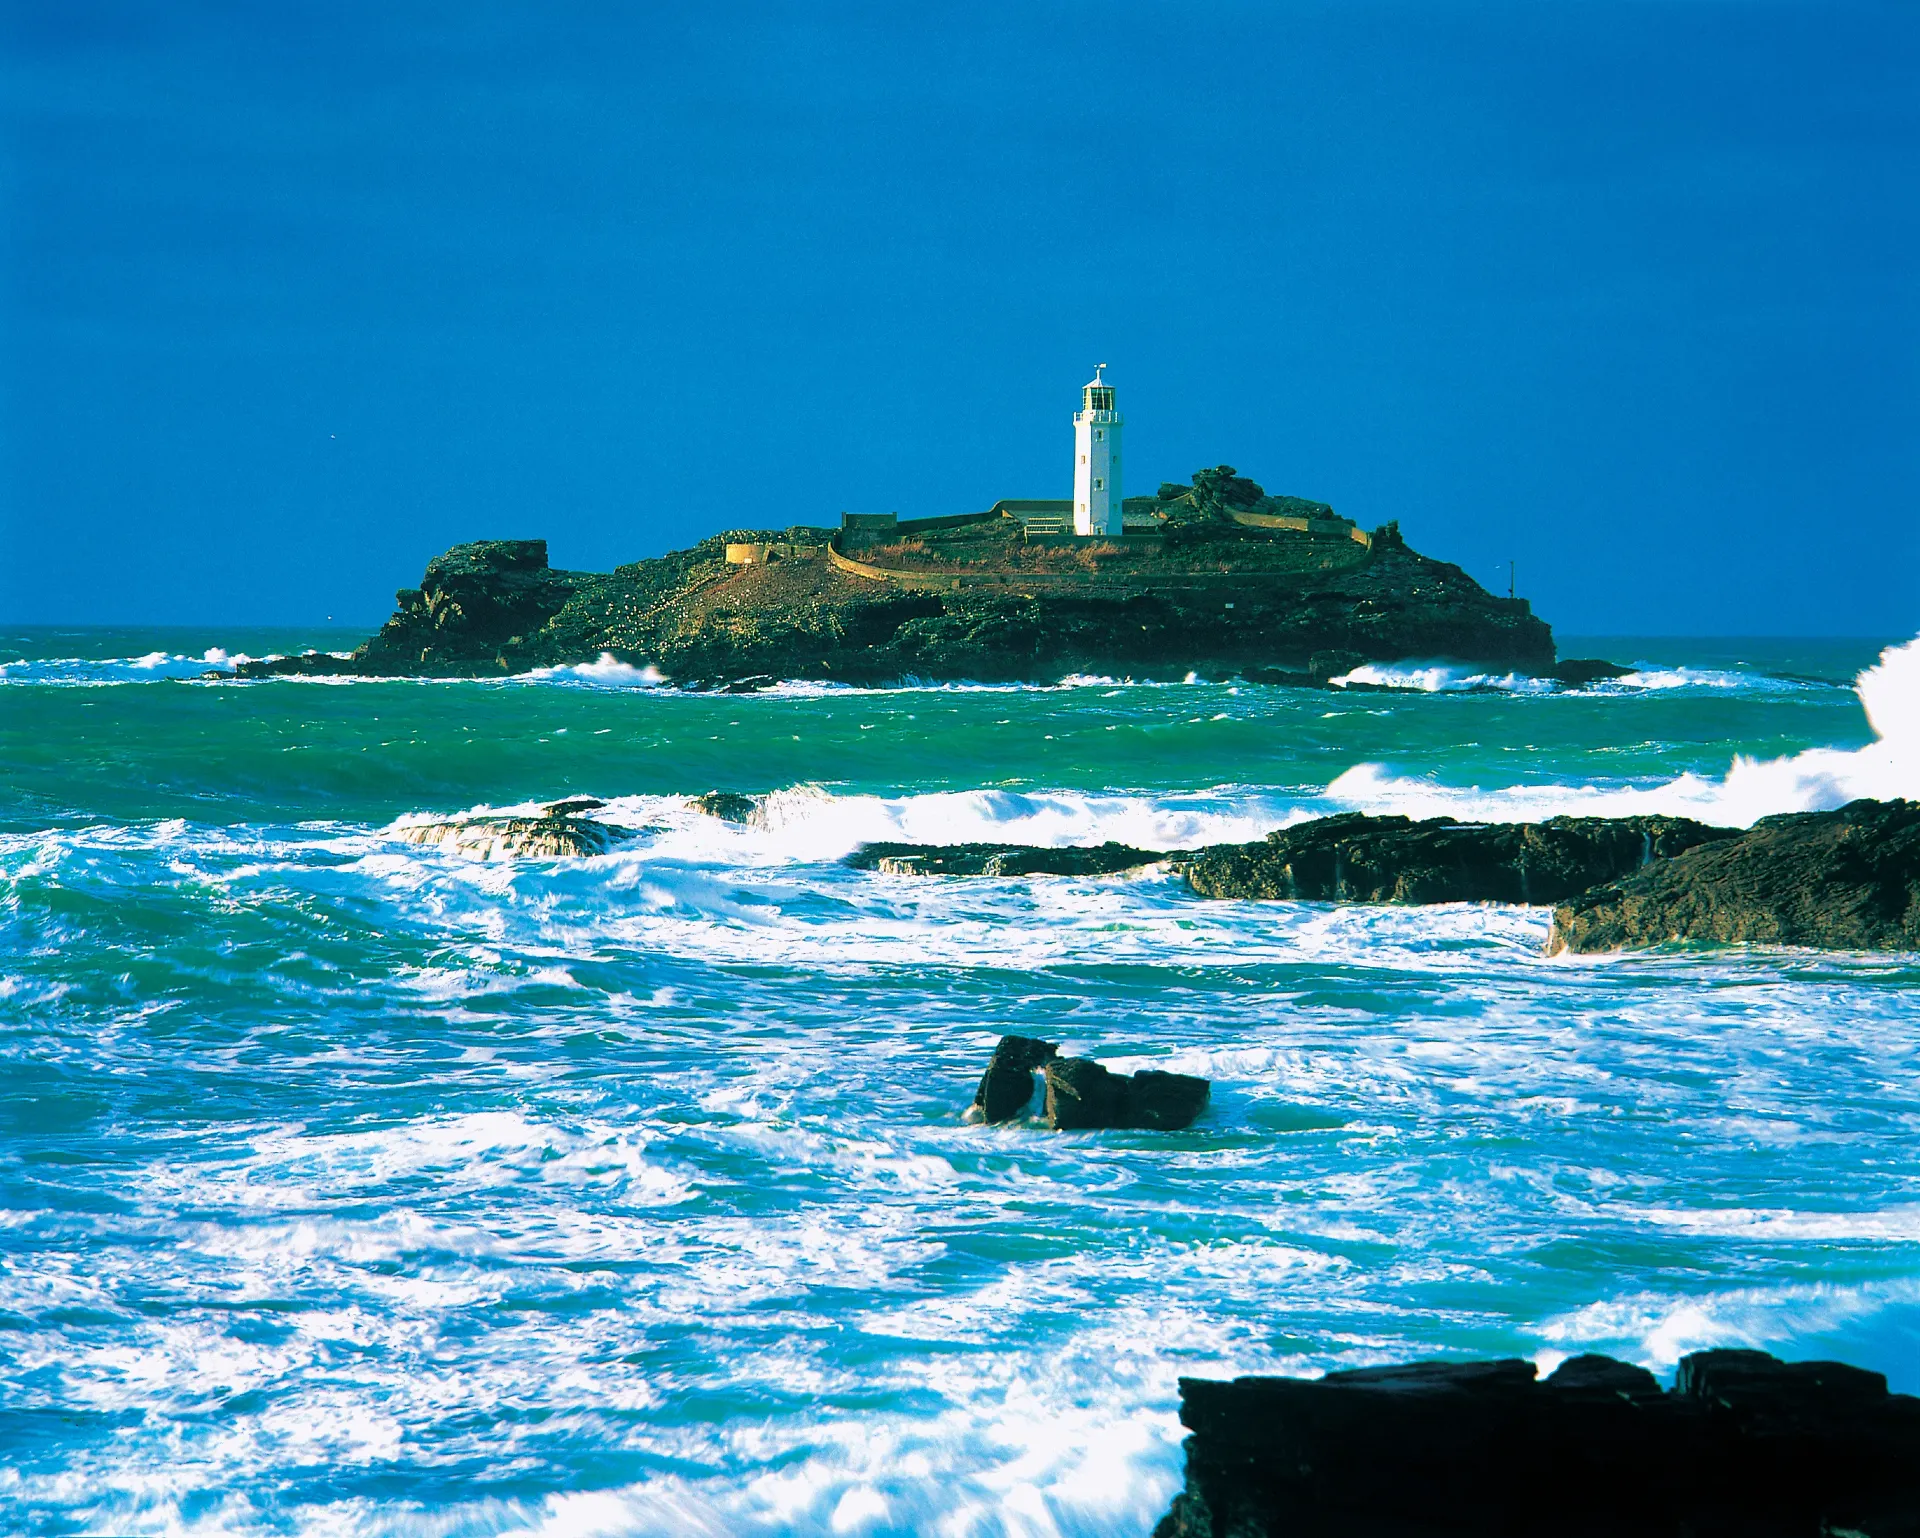 A calm, clear view of Godrevy Lighthouse